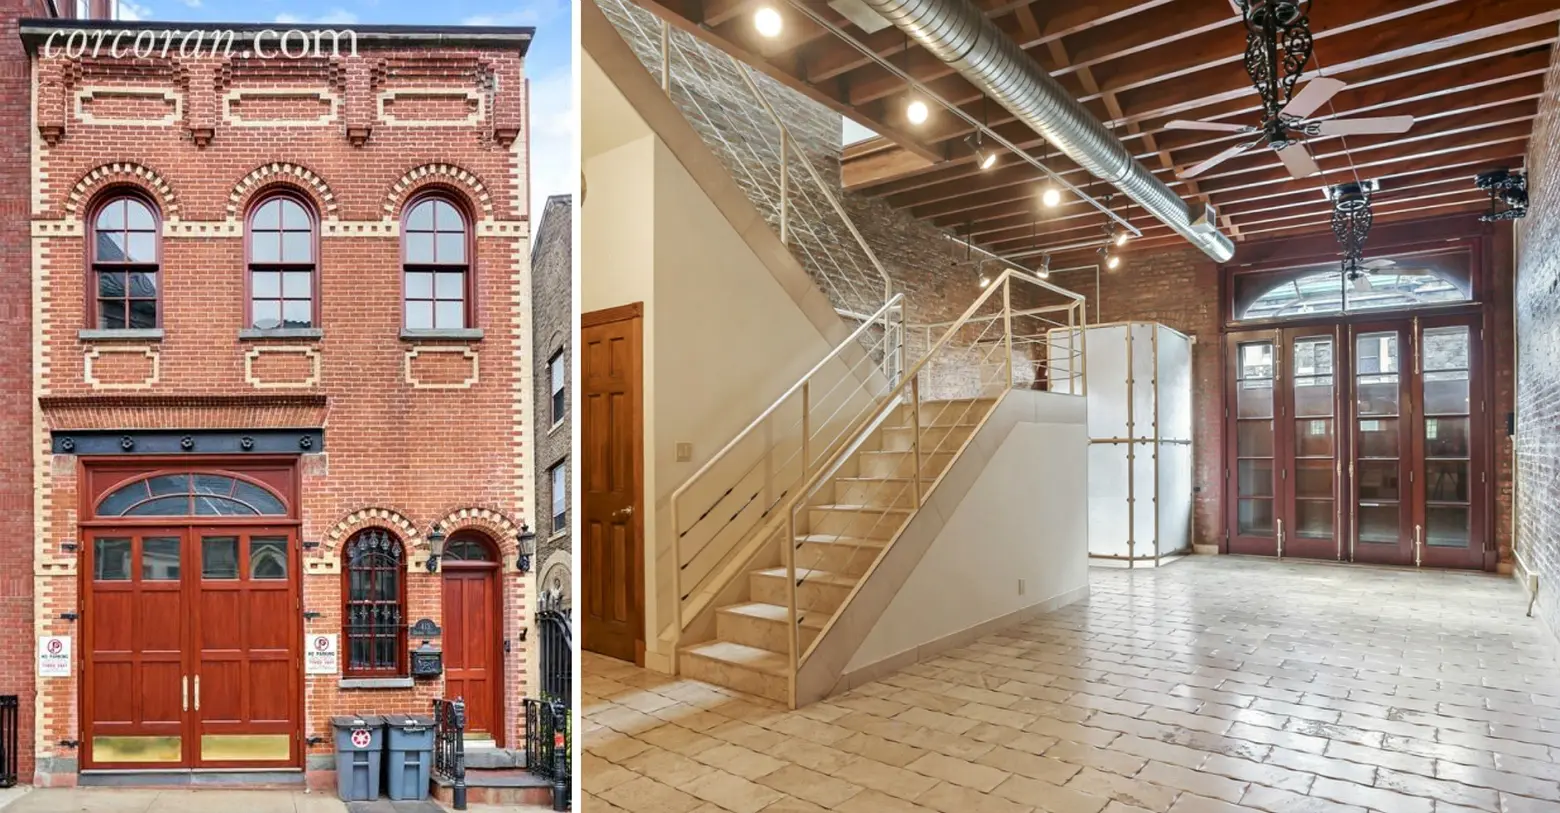 Rent this historic-meets-modern Cobble Hill carriage house for $8,500/month